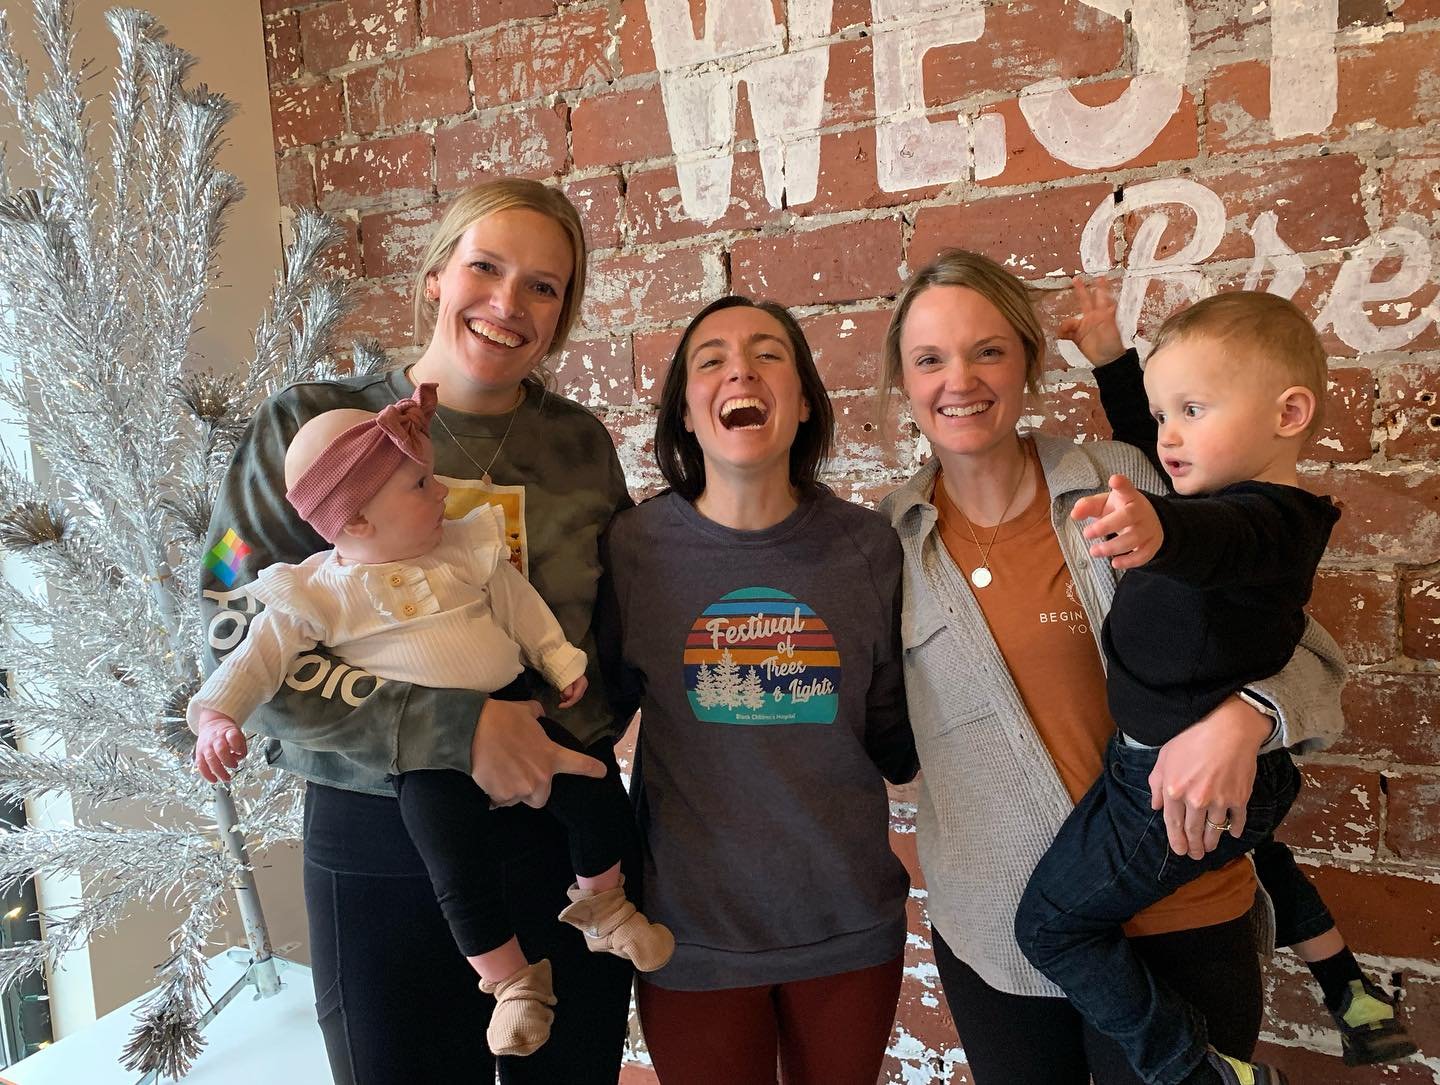 Tomorrow is community yoga at @westhillbrewingcompany! And community it&rsquo;s what it&rsquo;s all about. Bring your besties, bring your babies! All are welcome. 

10:45-11:45 a.m. 
Doors open at 10:30 a.m.
$20 admission paid at the taproom